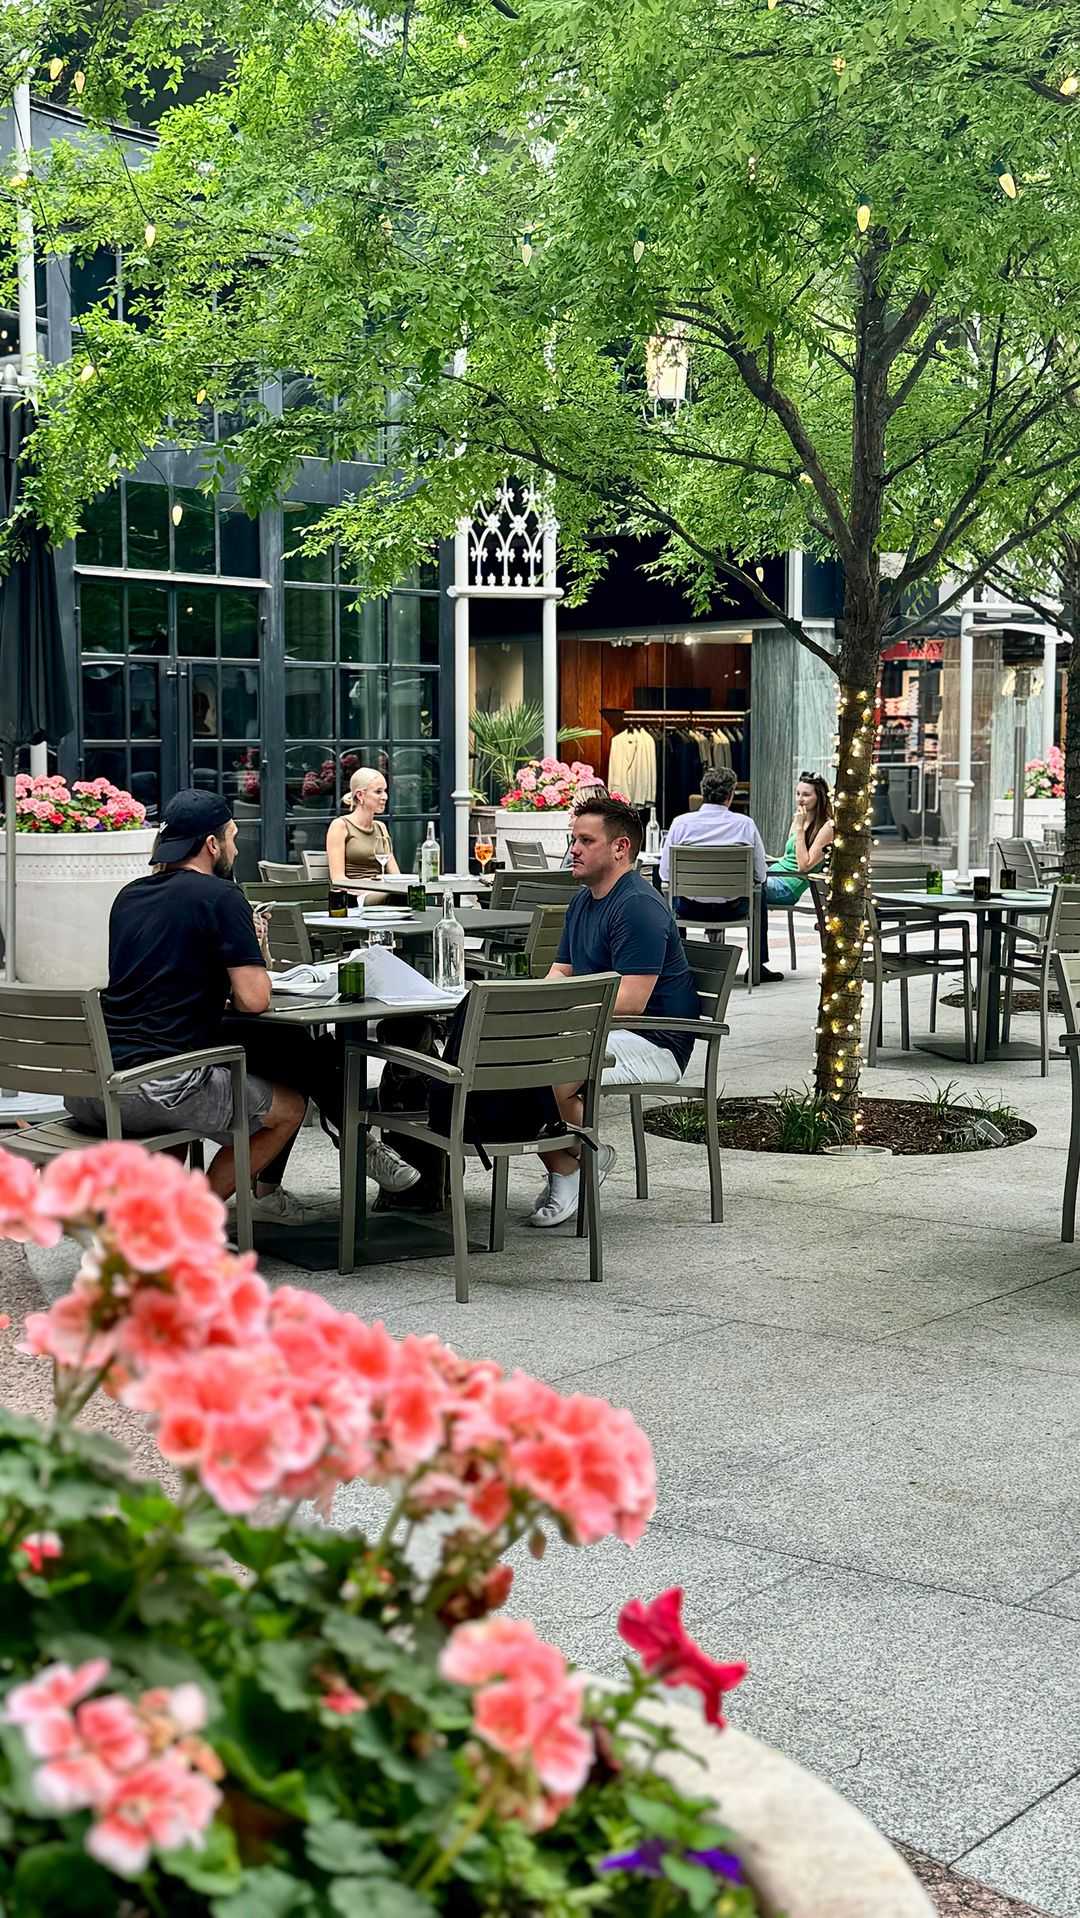 Take a break from work or tag a friend for lunch and enjoy a moment of peace in our courtyard. The Courtyard provides a serene oasis surrounded by the elegance of Stanley Korshak, the allure of Sixty Vines, and the sophistication of The Capital Grille. Whether you want to have a leisurely lunch or just need to unwind from work, it’s the perfect place! Come and experience the beauty of The Crescent. 

📍 The Crescent 200 Crescent Court, in Uptown Dallas, Texas 
#thecrescent #thecrescentdallas #uptowndallas #commercialrealestate #dallasbrokers #dallasleasing #officeamenities